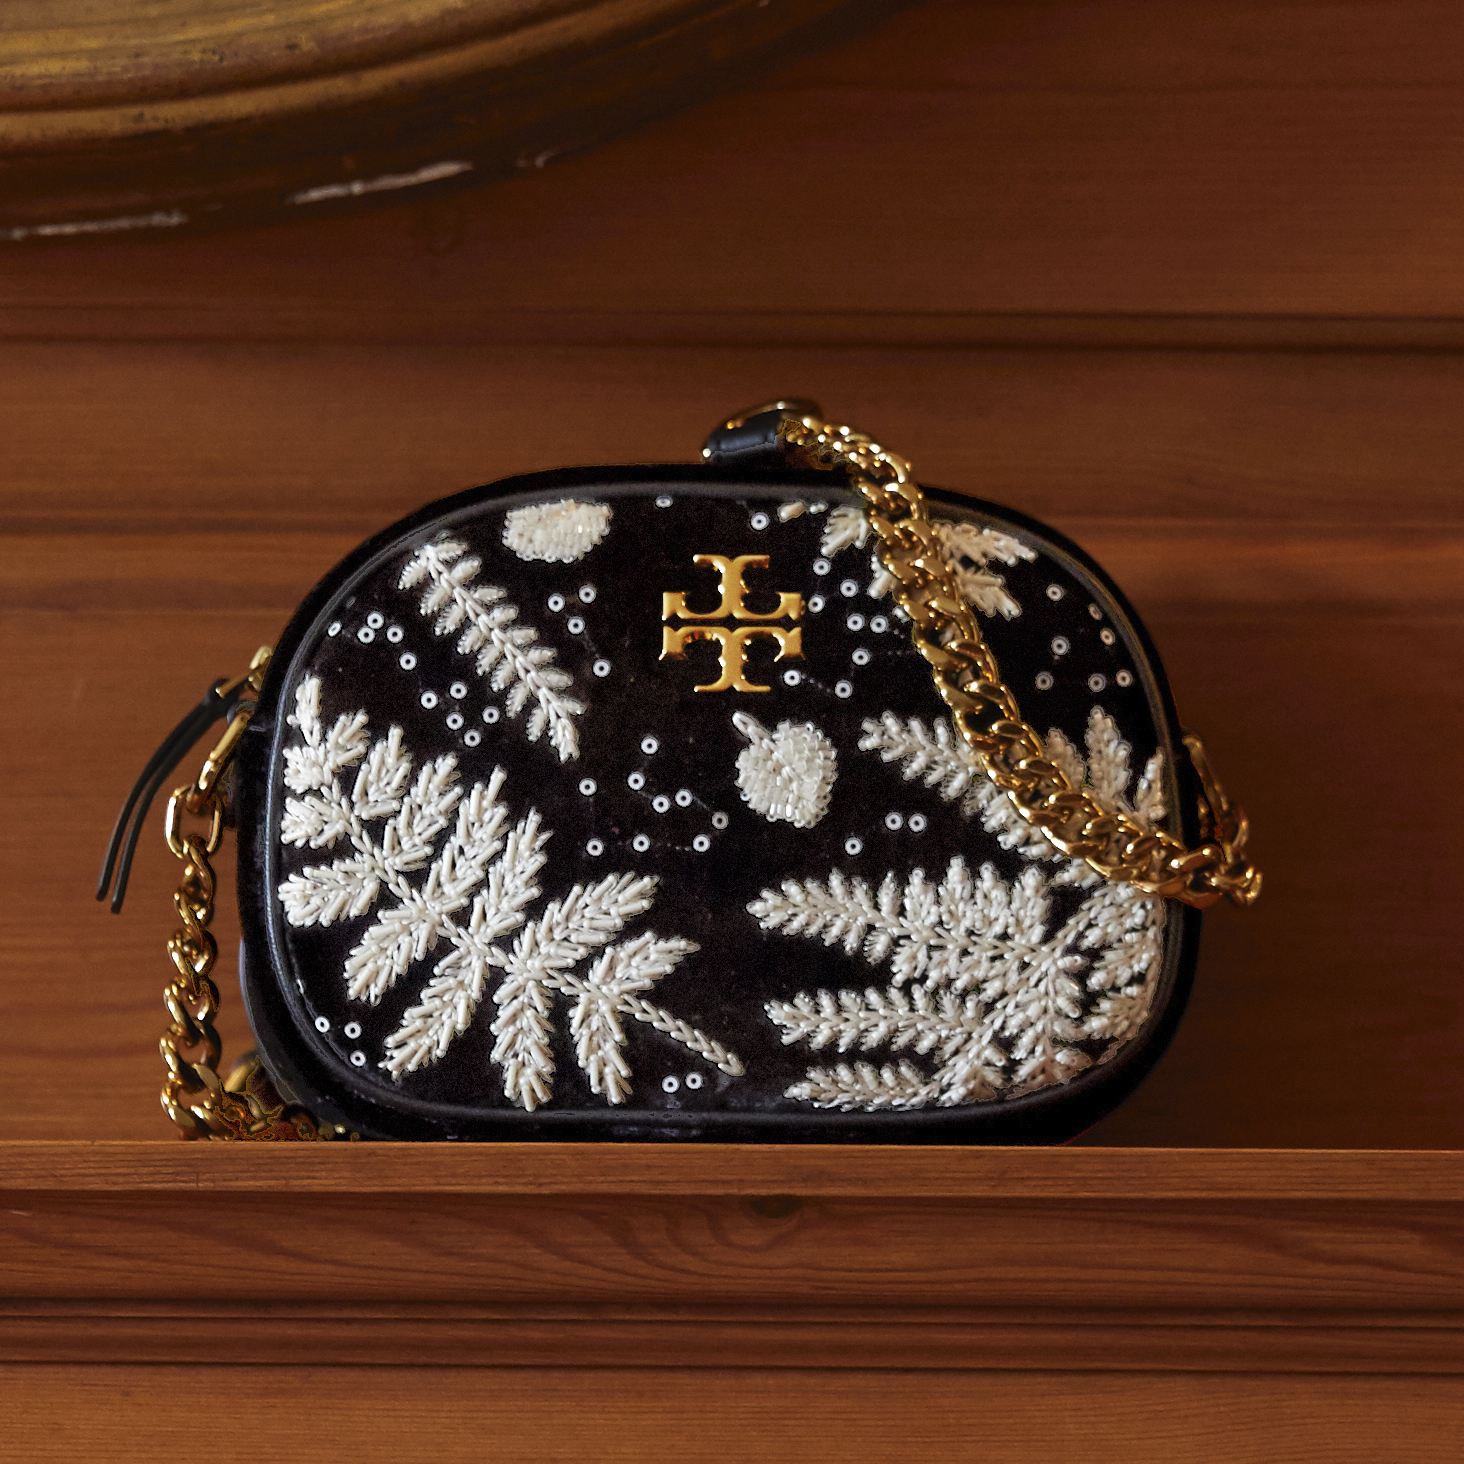 Tory Burch Holiday Sale | Georgetown DC - Explore Georgetown in Washington,  DC